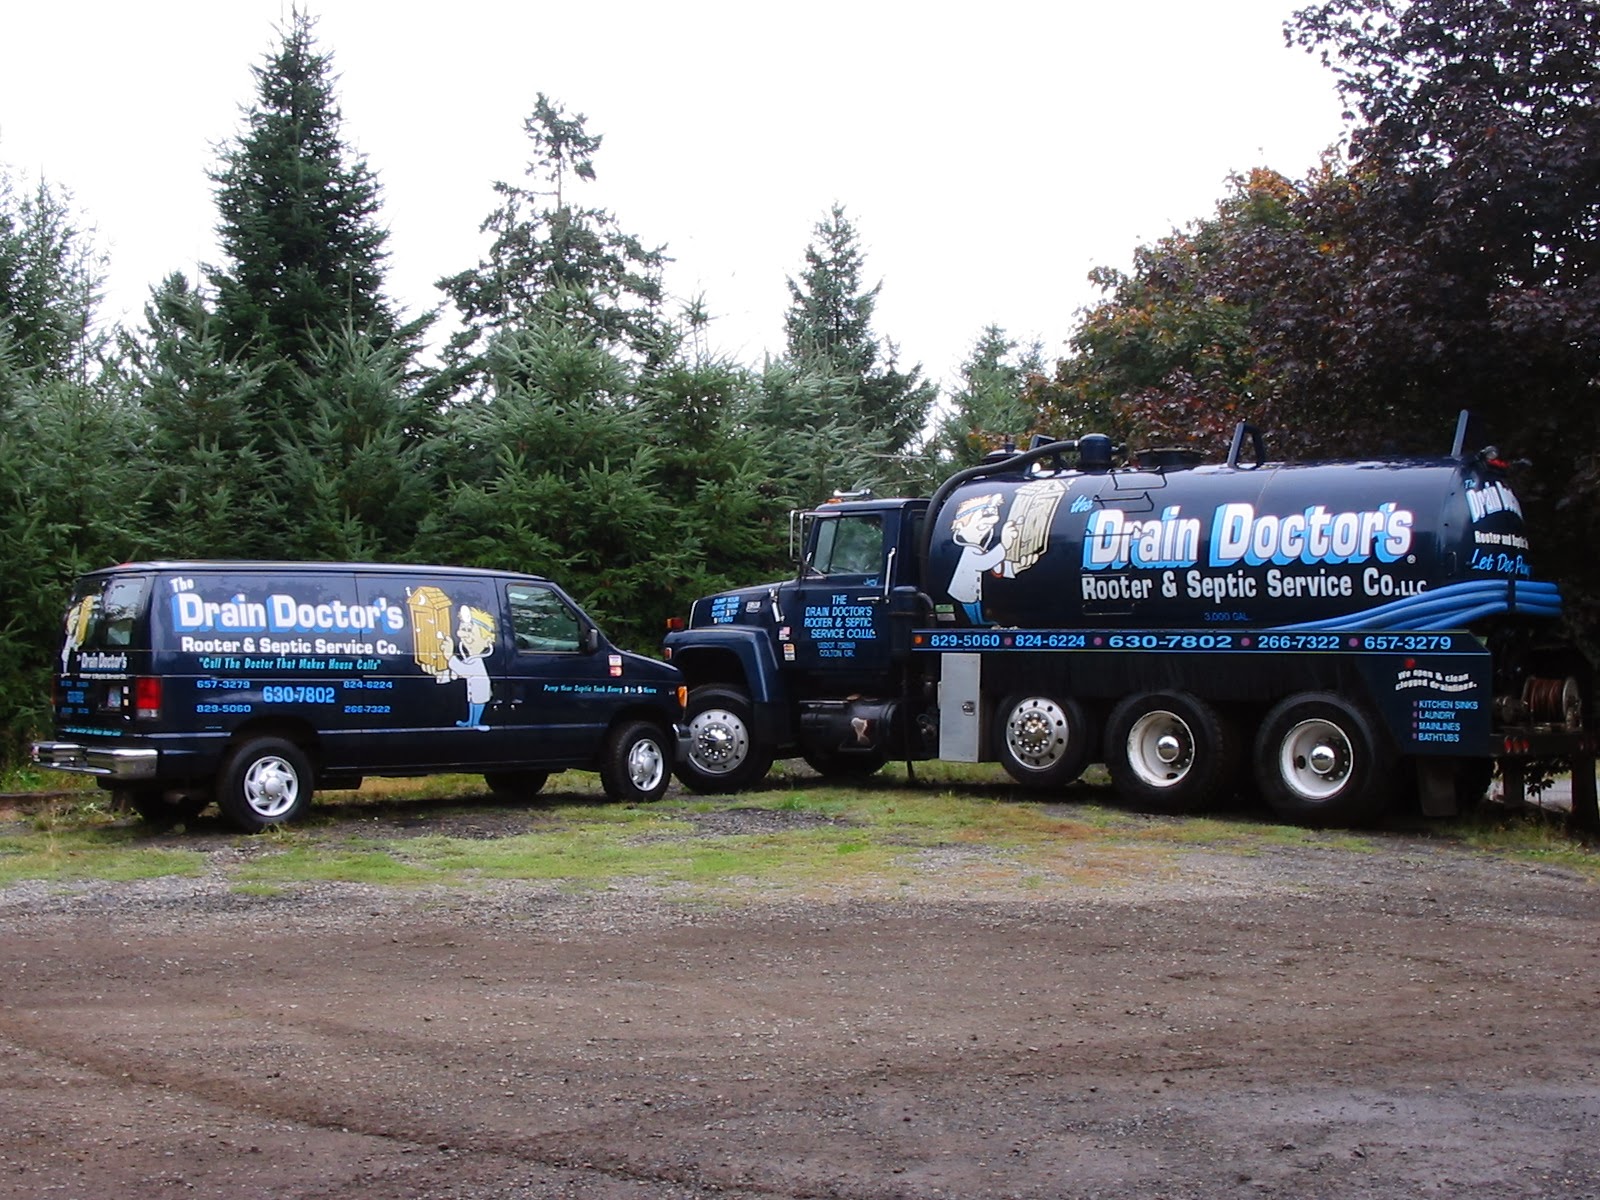 The Drain Doctors Rooter & Septic Service Co. LLC. | Colton, OR, 97017 | +1 (503) 630-7802